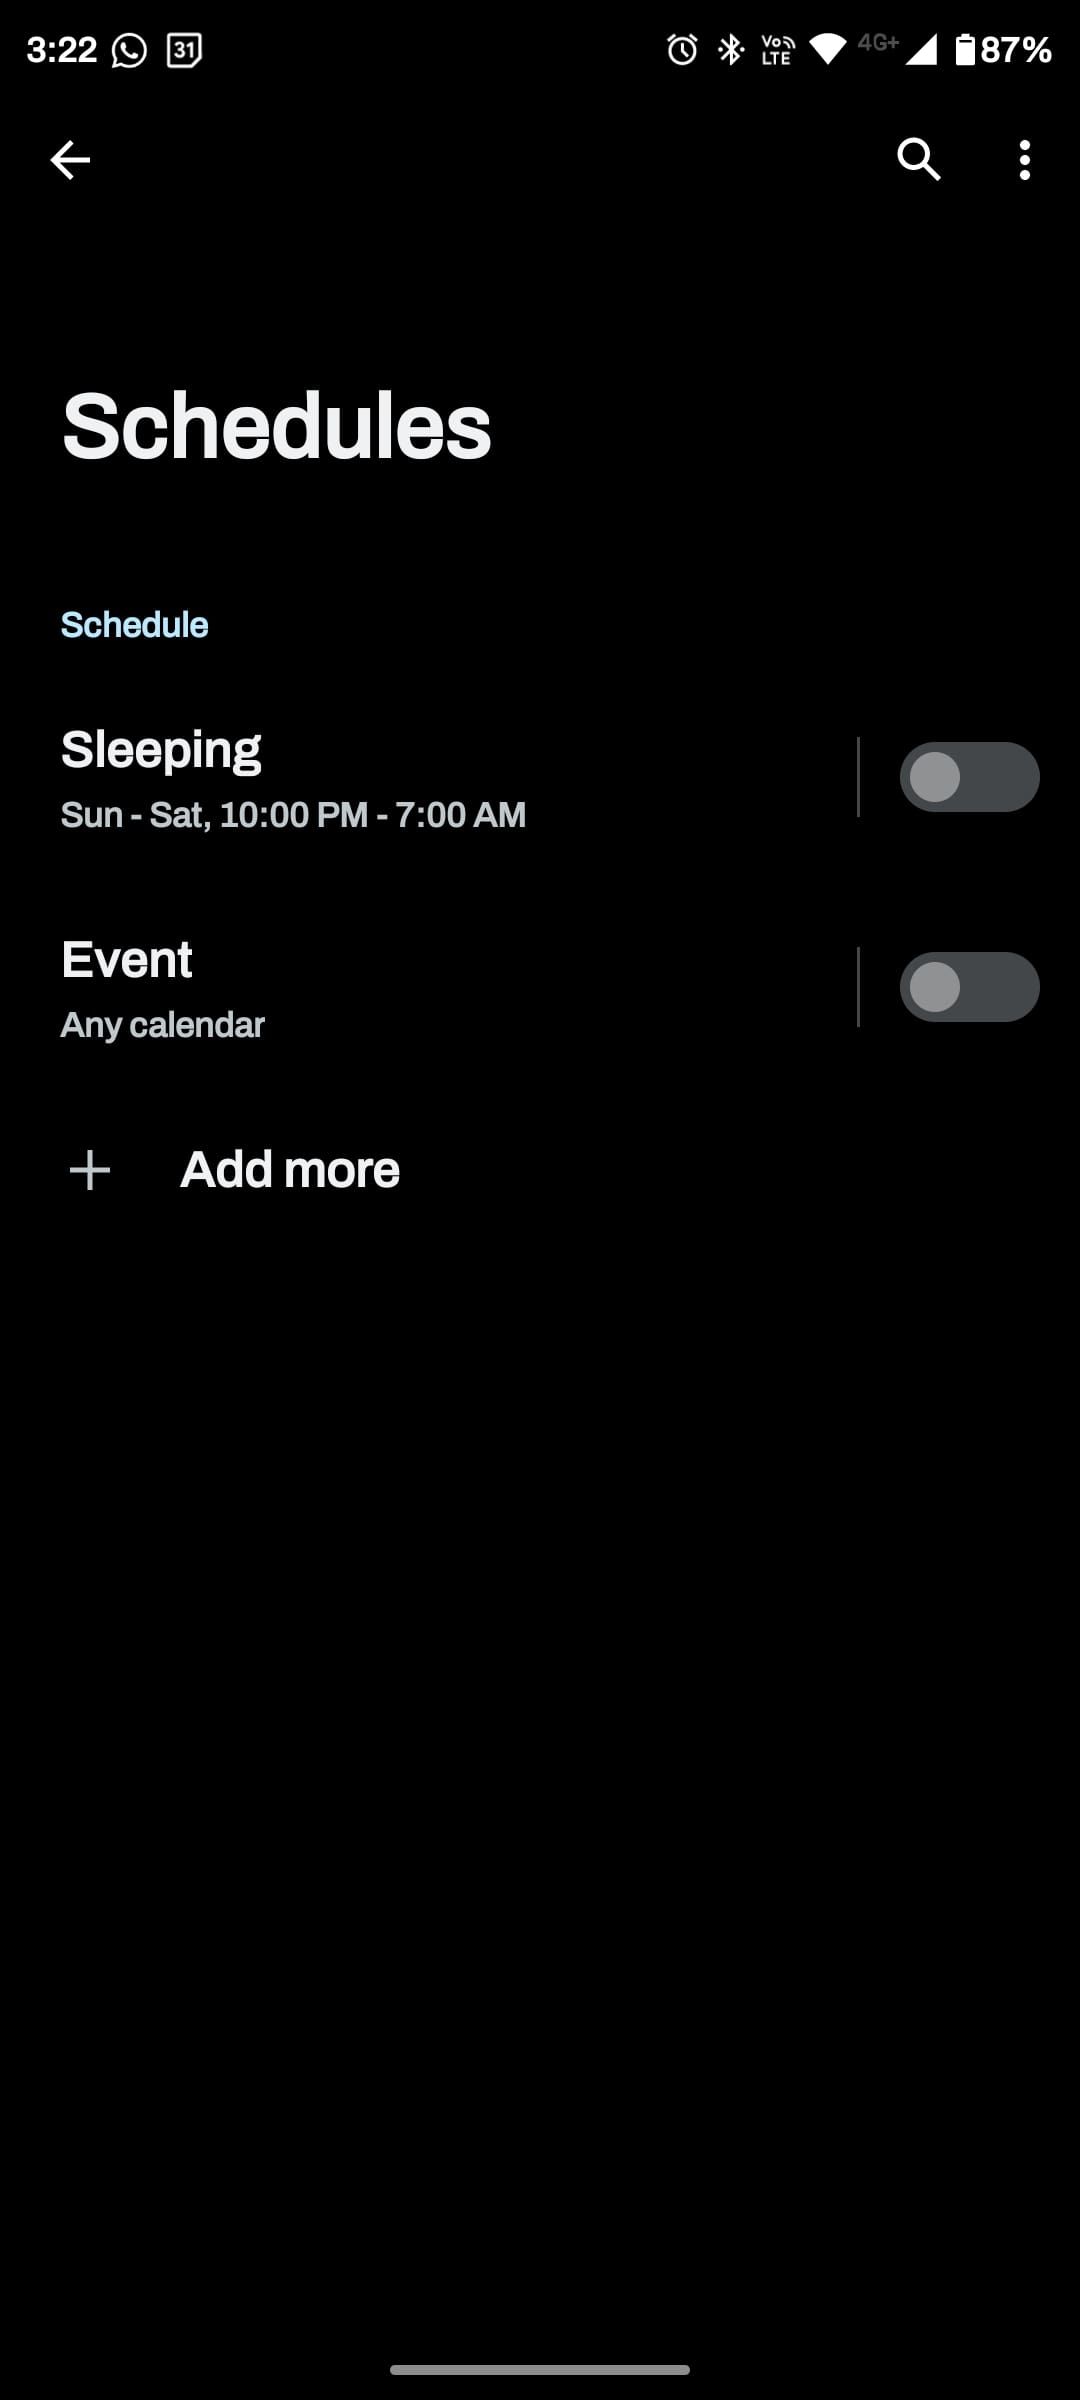 Schedules settings menu with sleeping and event toggles